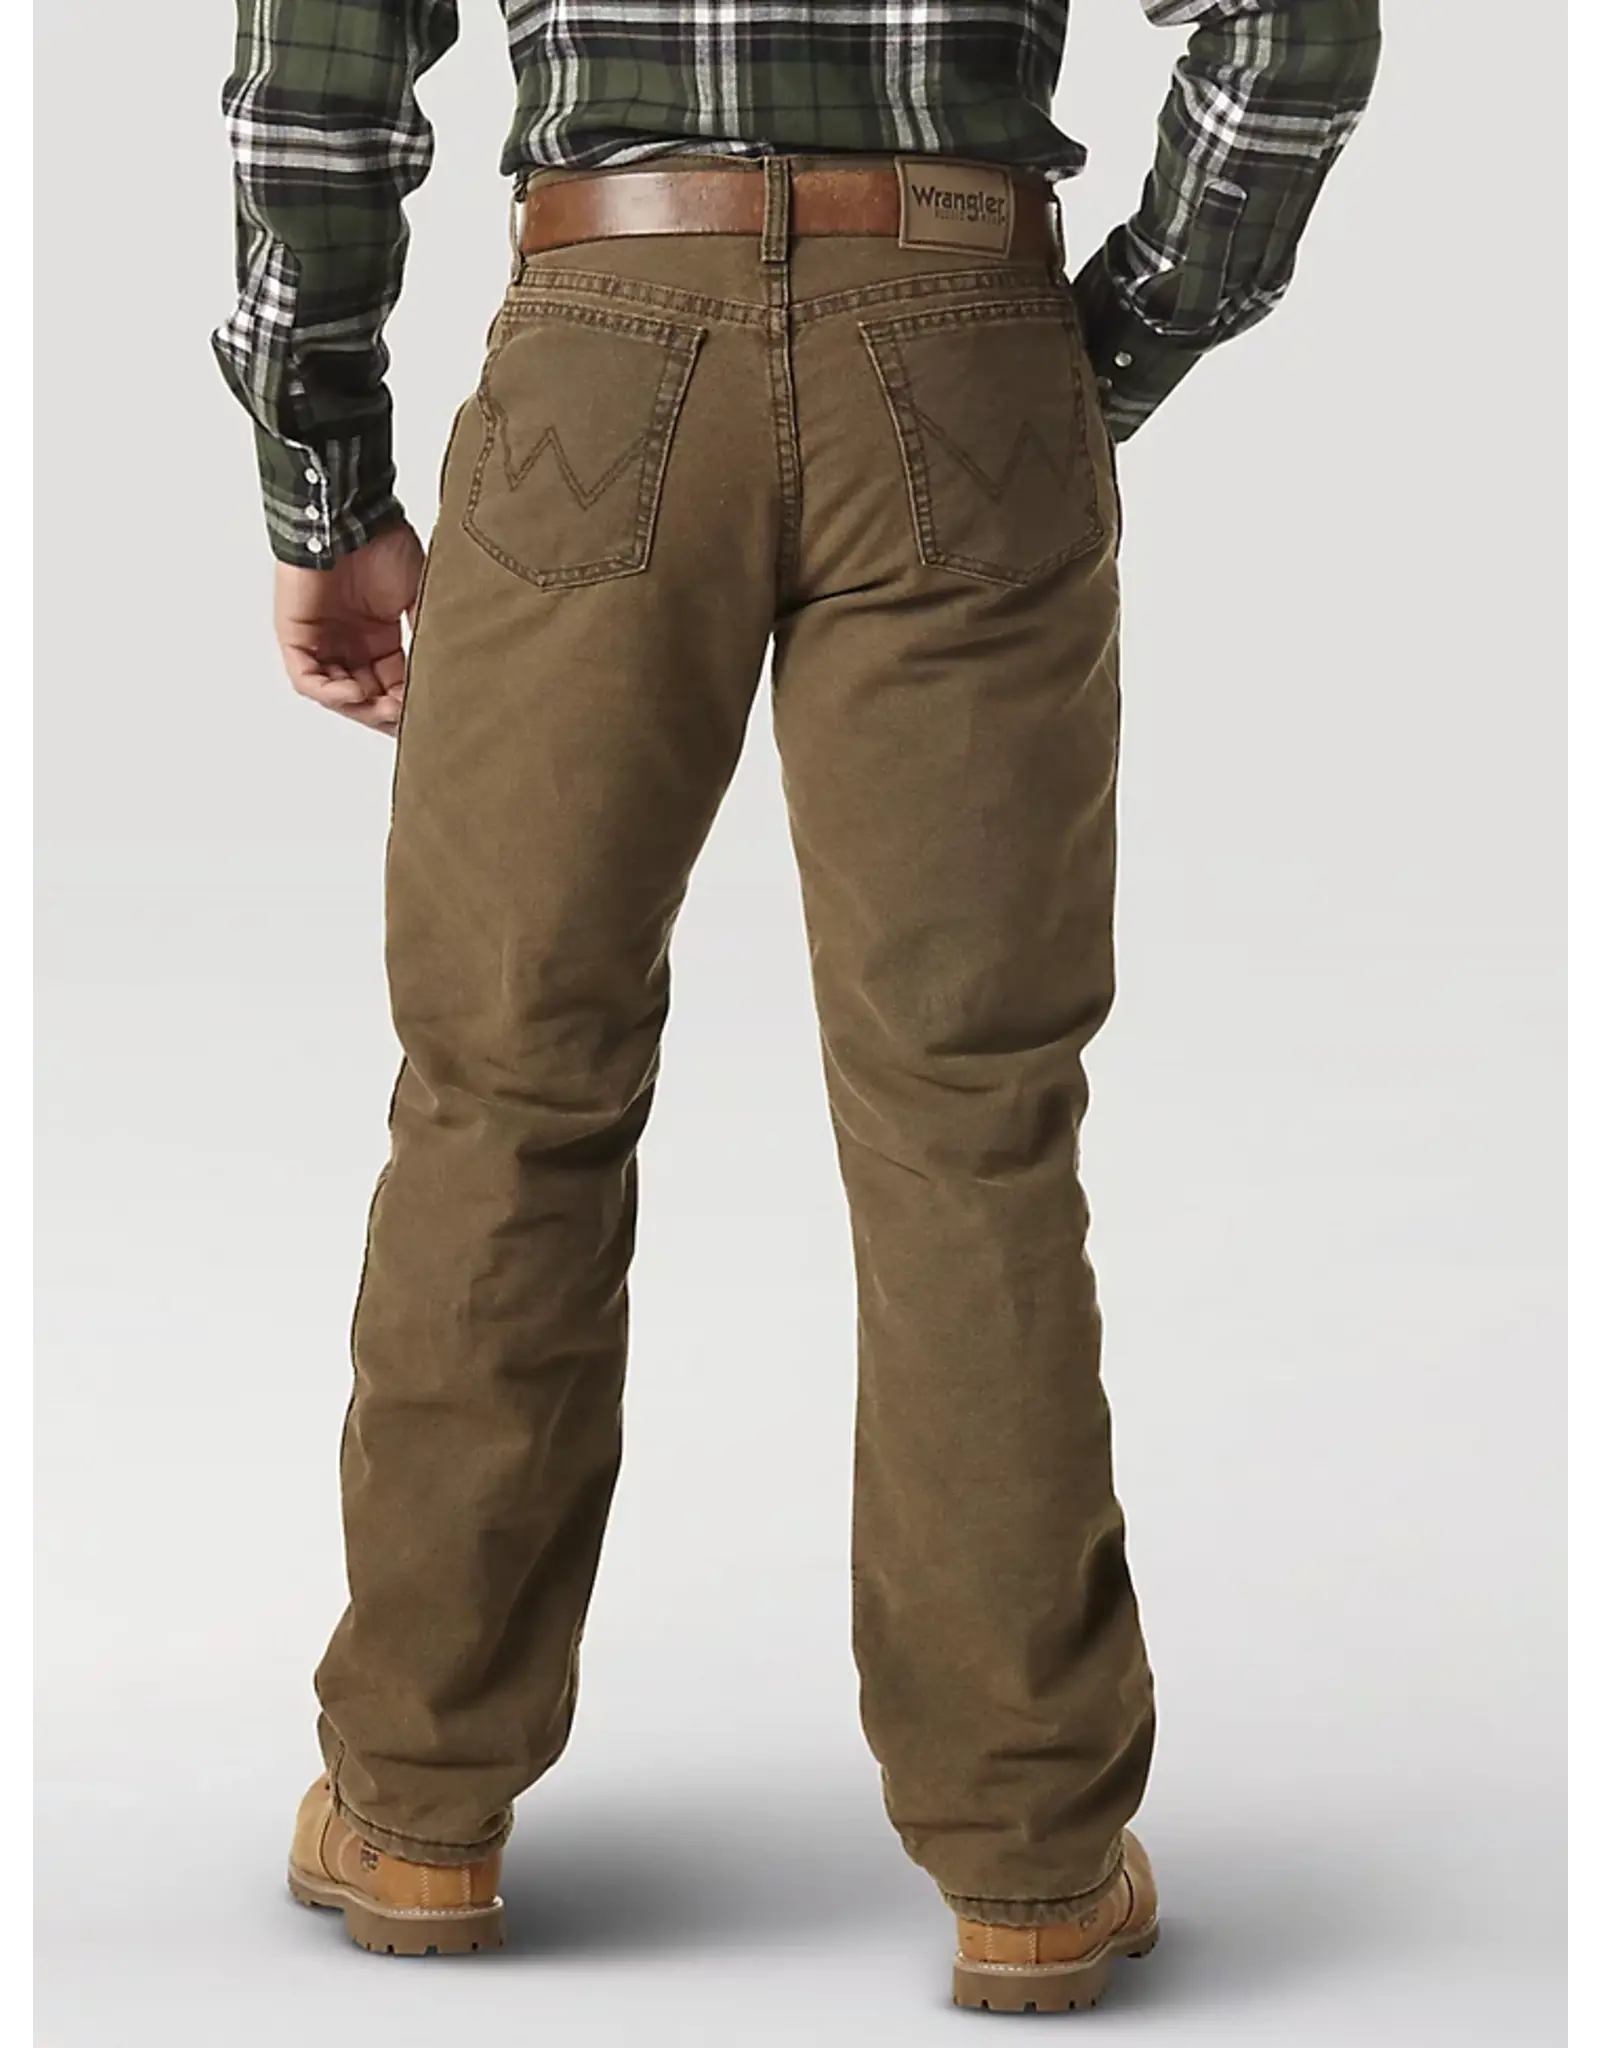 THINSULATE JEANS RELAXED FIT - Smith Army Surplus